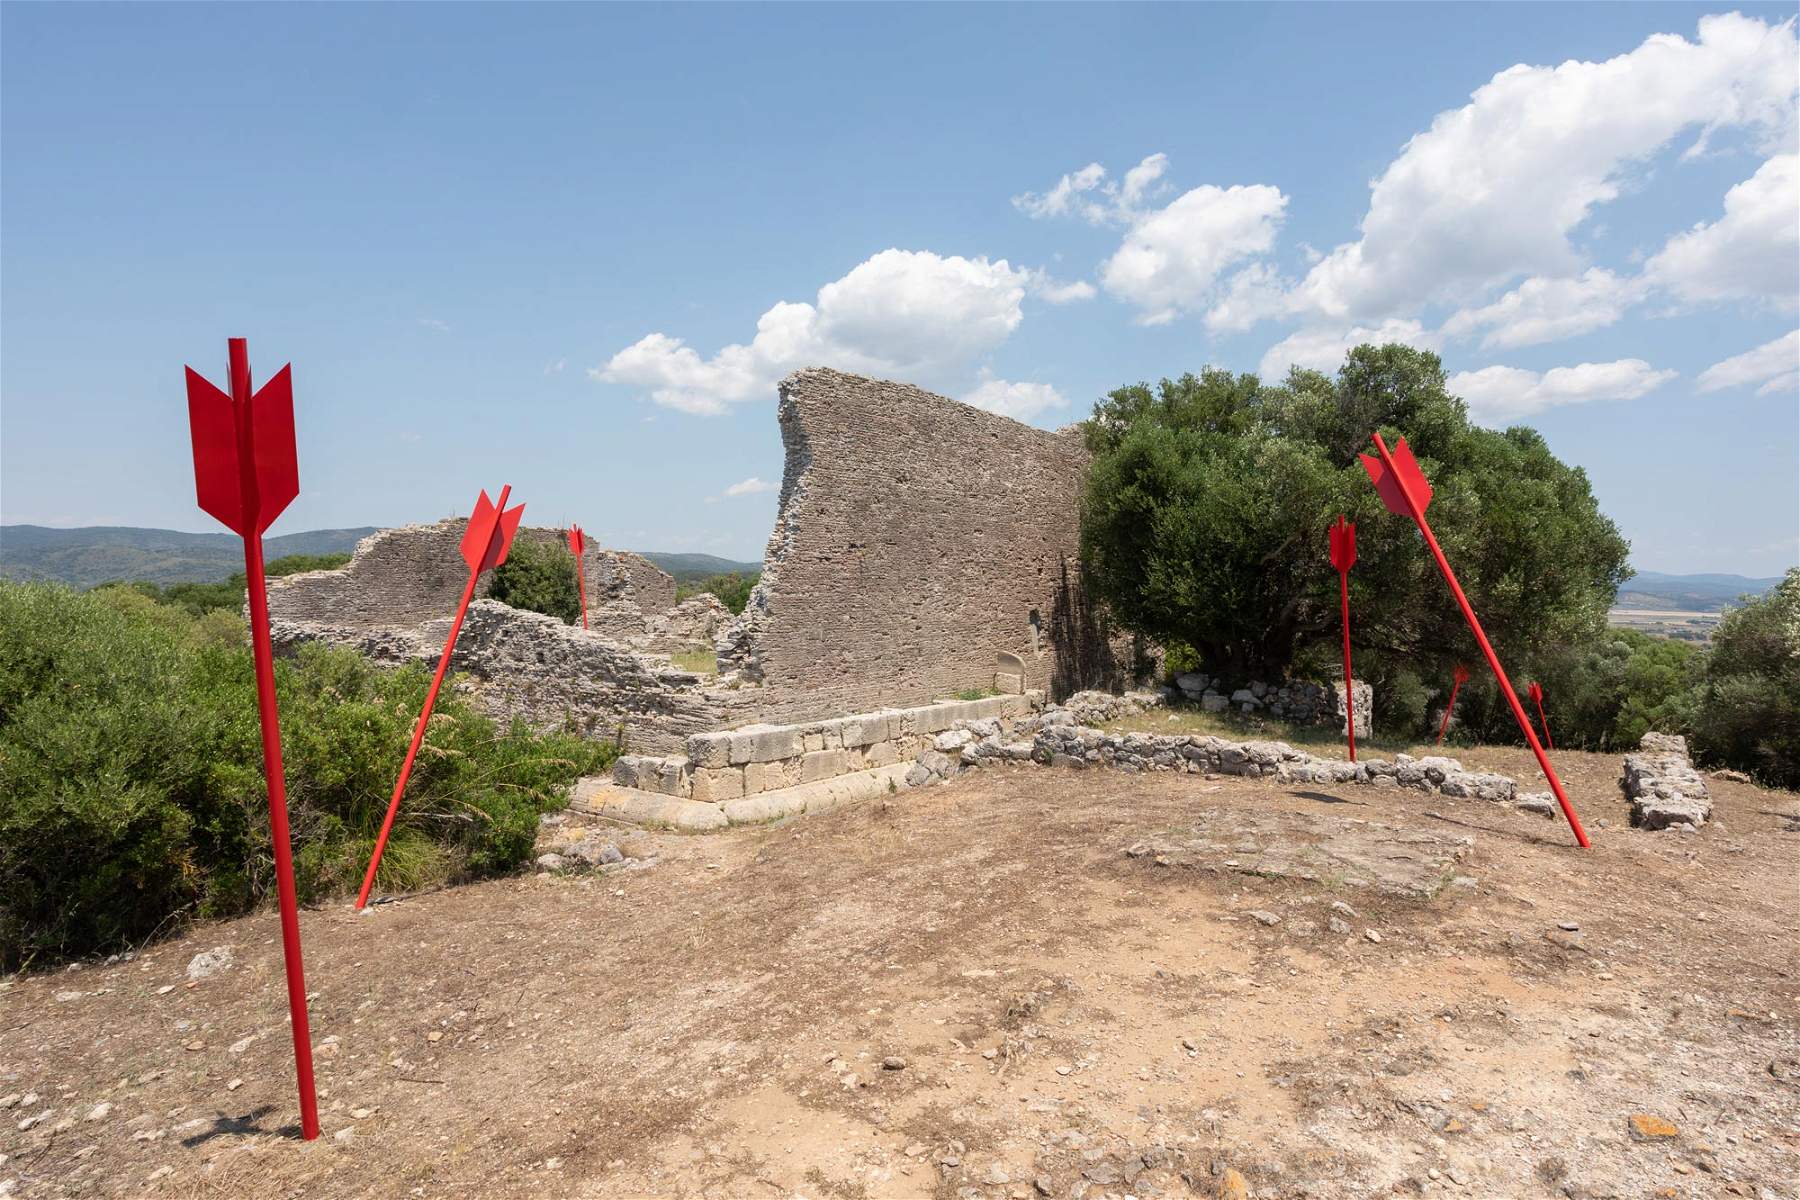 Felice Levini's arrows in Cosa Archaeological Park: the intervention for Hypermaremma